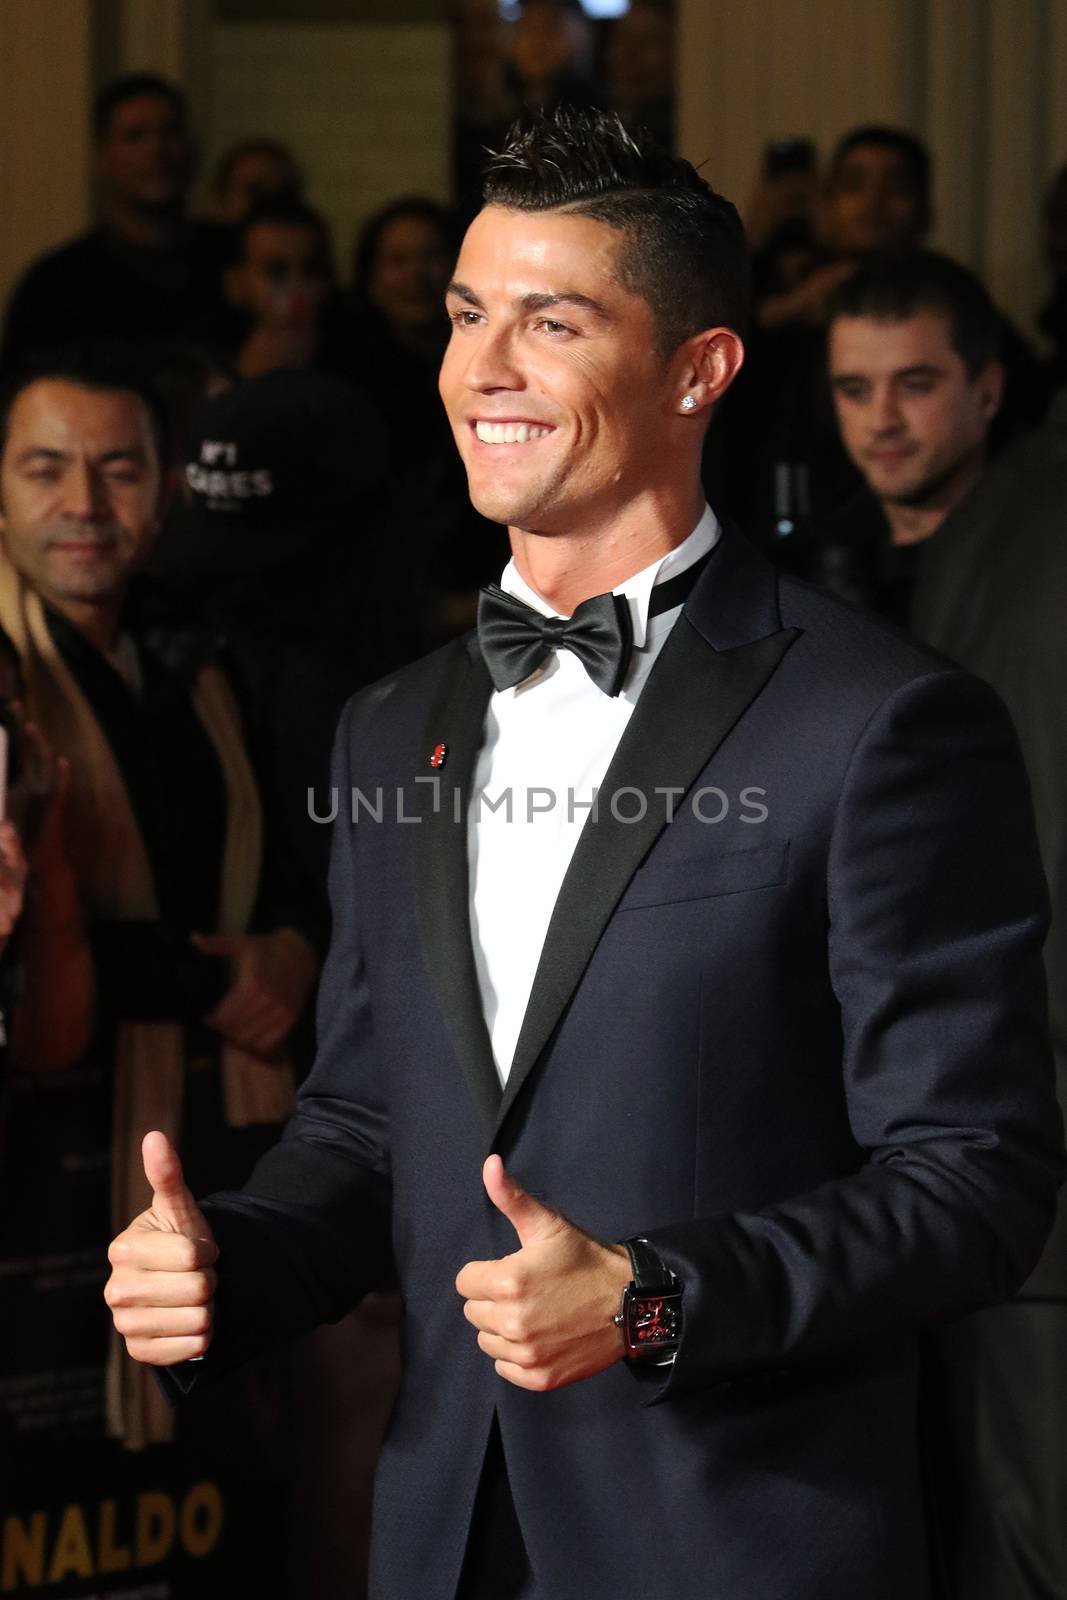 UNITED KINGDOM, London: Cristiano Ronaldo attends the world premiere of the documentary Ronaldo at Vue West End cinema at Leicester Square, London on November 9, 2015. 